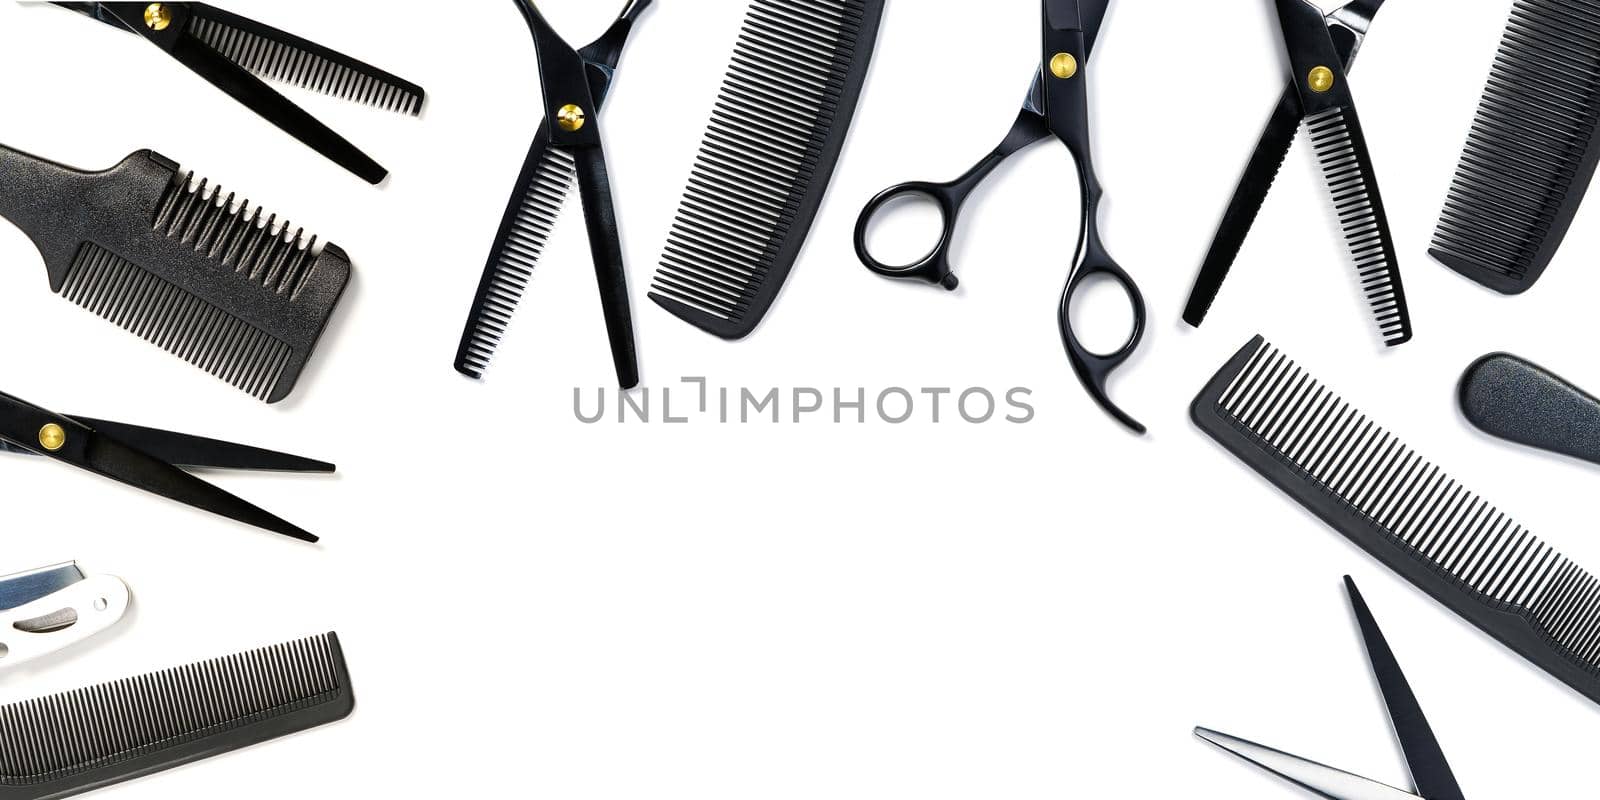 layout on white from scissors and combs for hairdressing services by PhotoTime